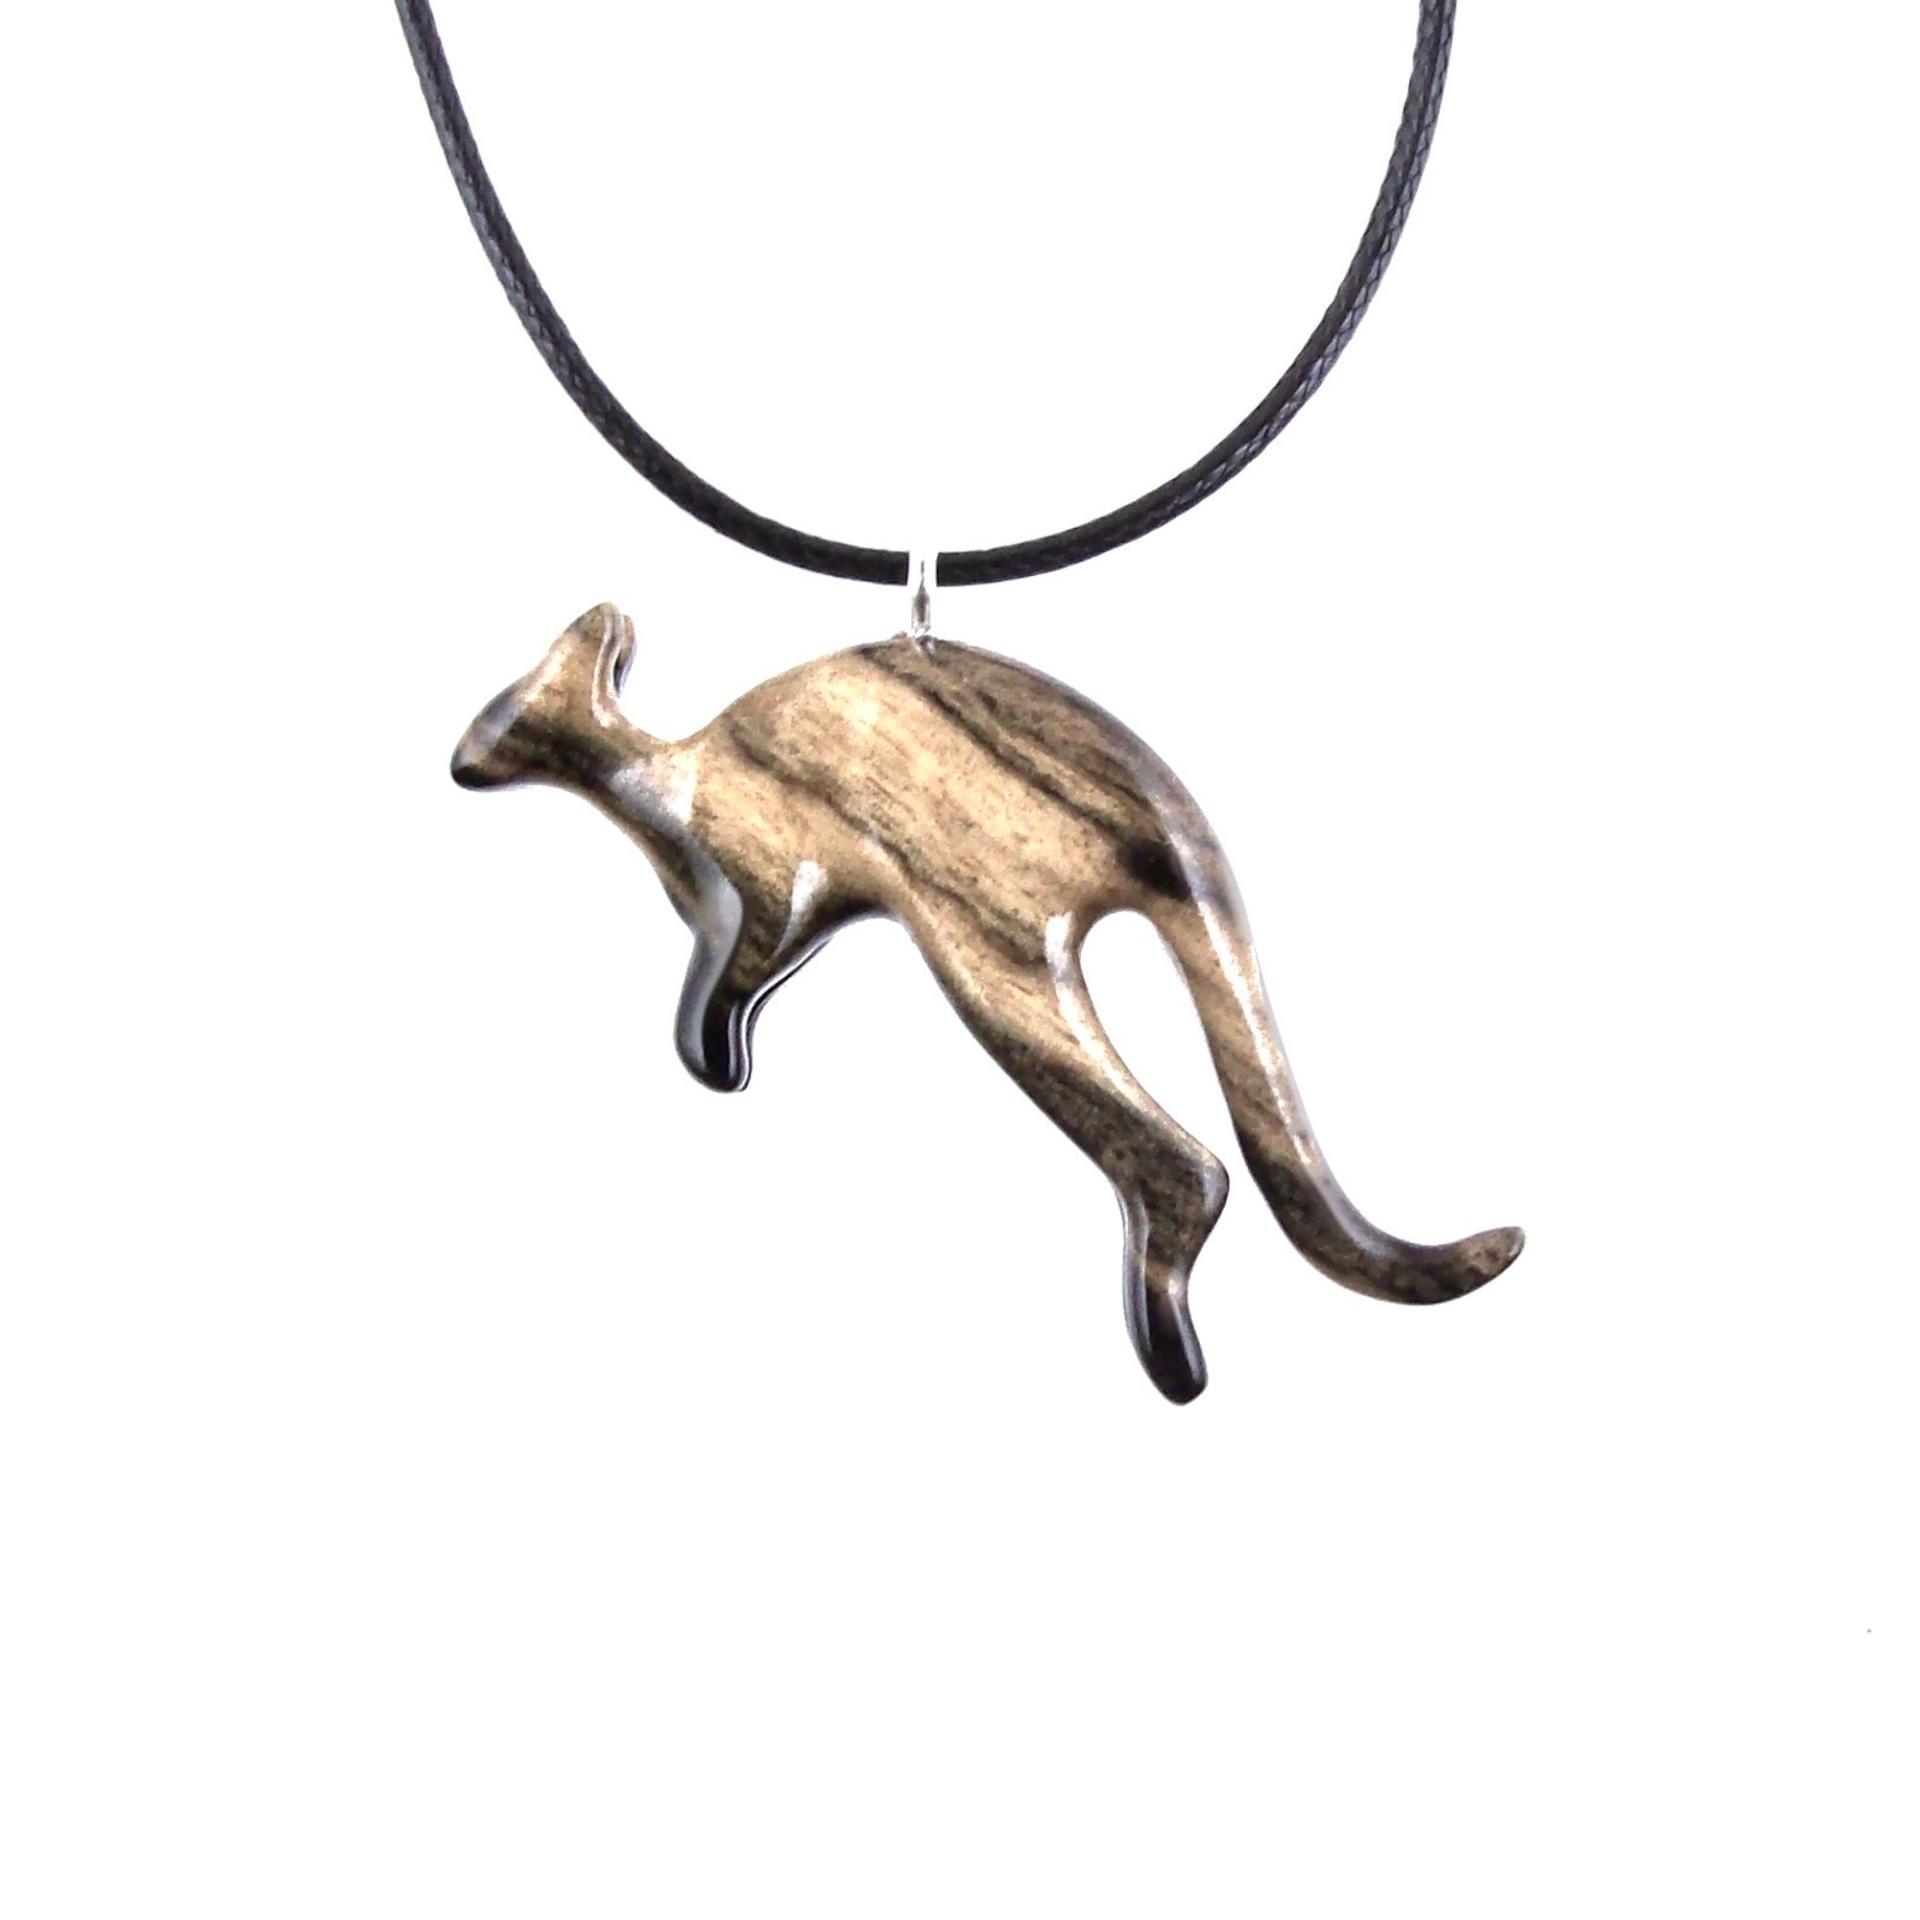 Hand Carved Kangaroo Pendant Necklace - Wooden Totem Spirit Animal Jewelry Gift for Men and Women